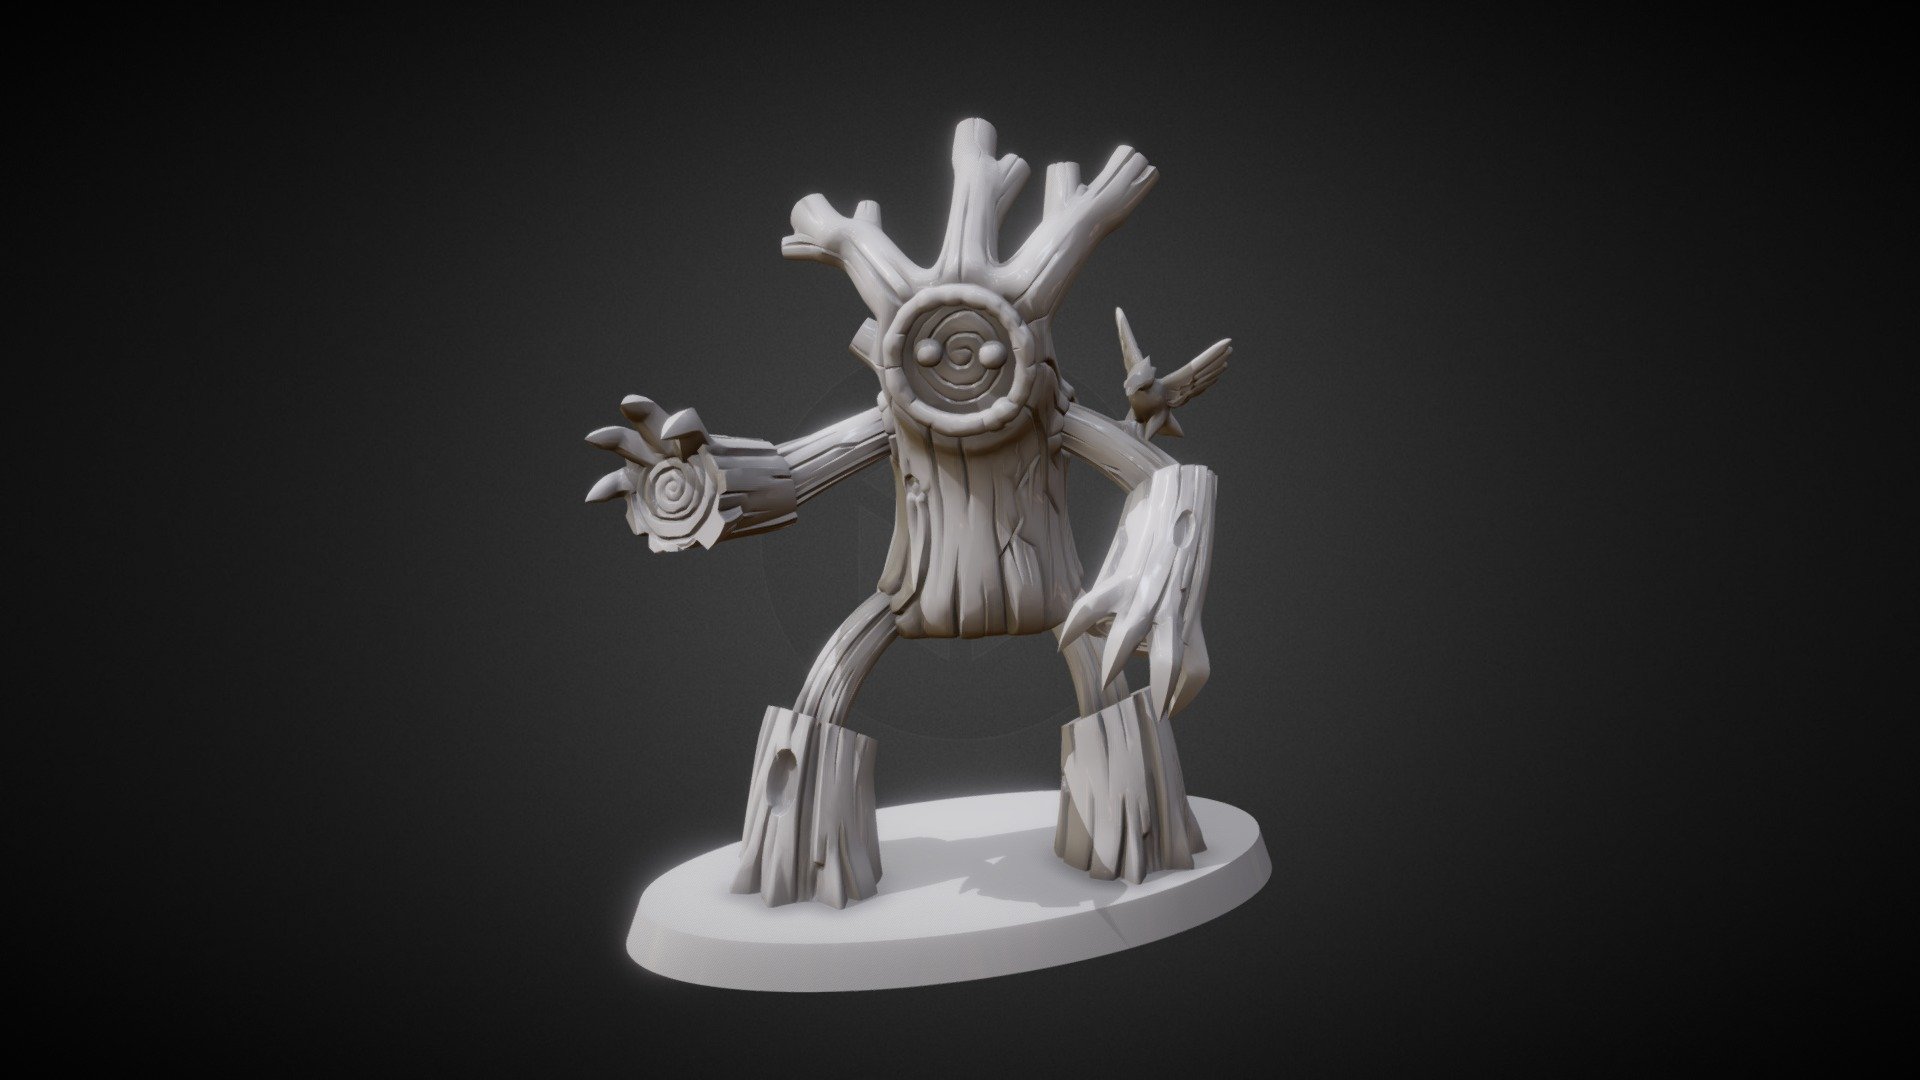 Treant model i made for Vesuvius Media's Dwar7s board game, based on Luis Brueh's concept.
Intended for plastic injection molding, this was split in parts with joints which were drafted at a 6 degree angle.
Created in Zbrush &amp; 3dCoat 3d model